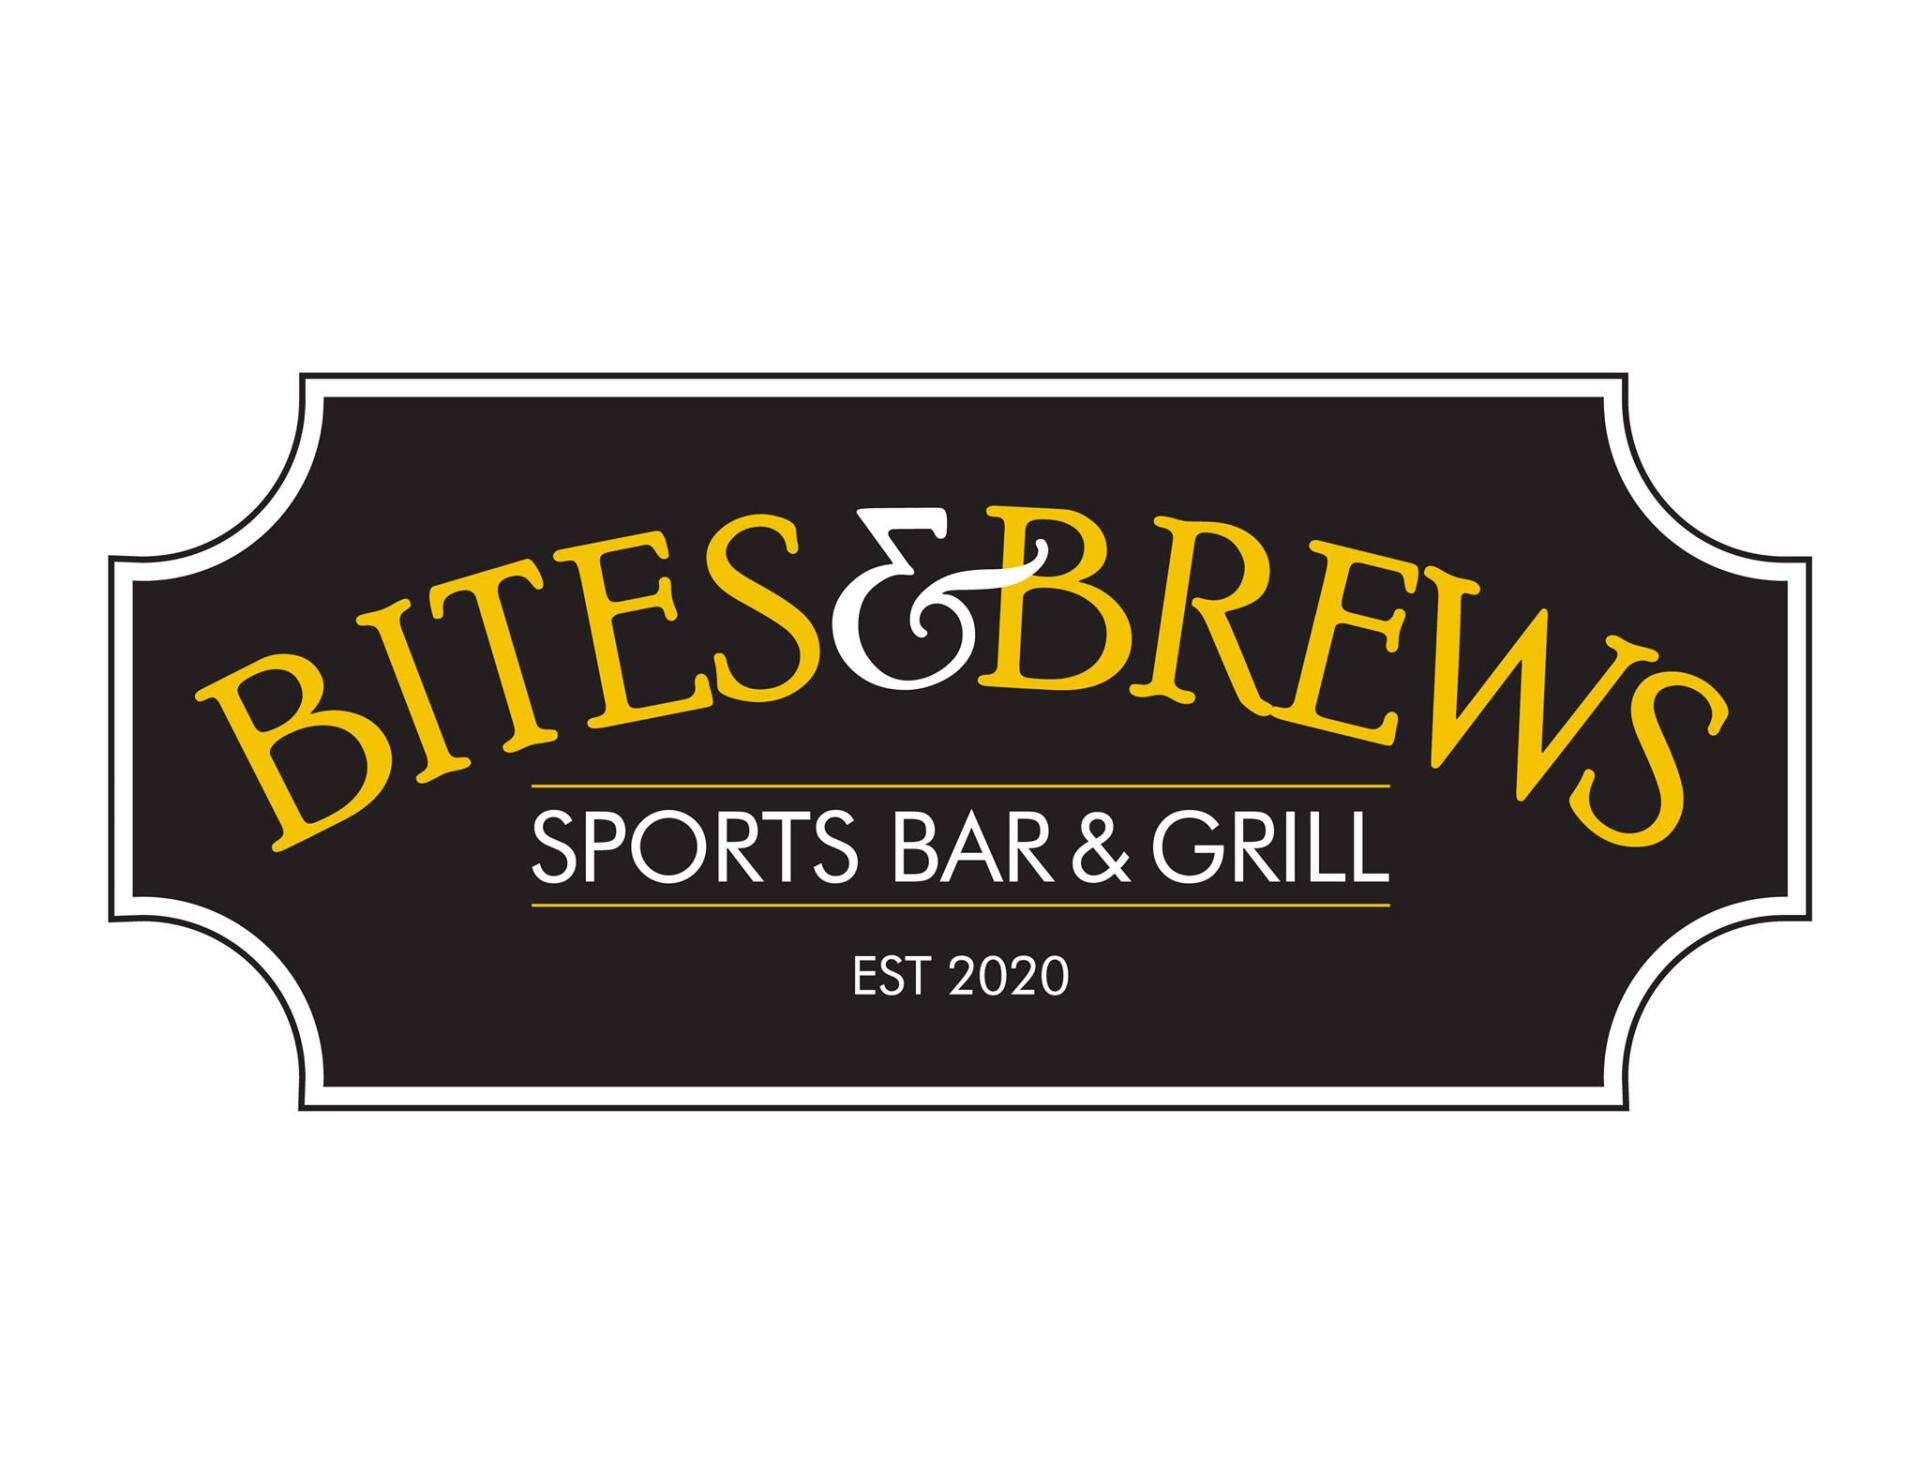 Bites & Brews, Johnstown PA, featured business of the Lorain/Stonycreek hiking trails